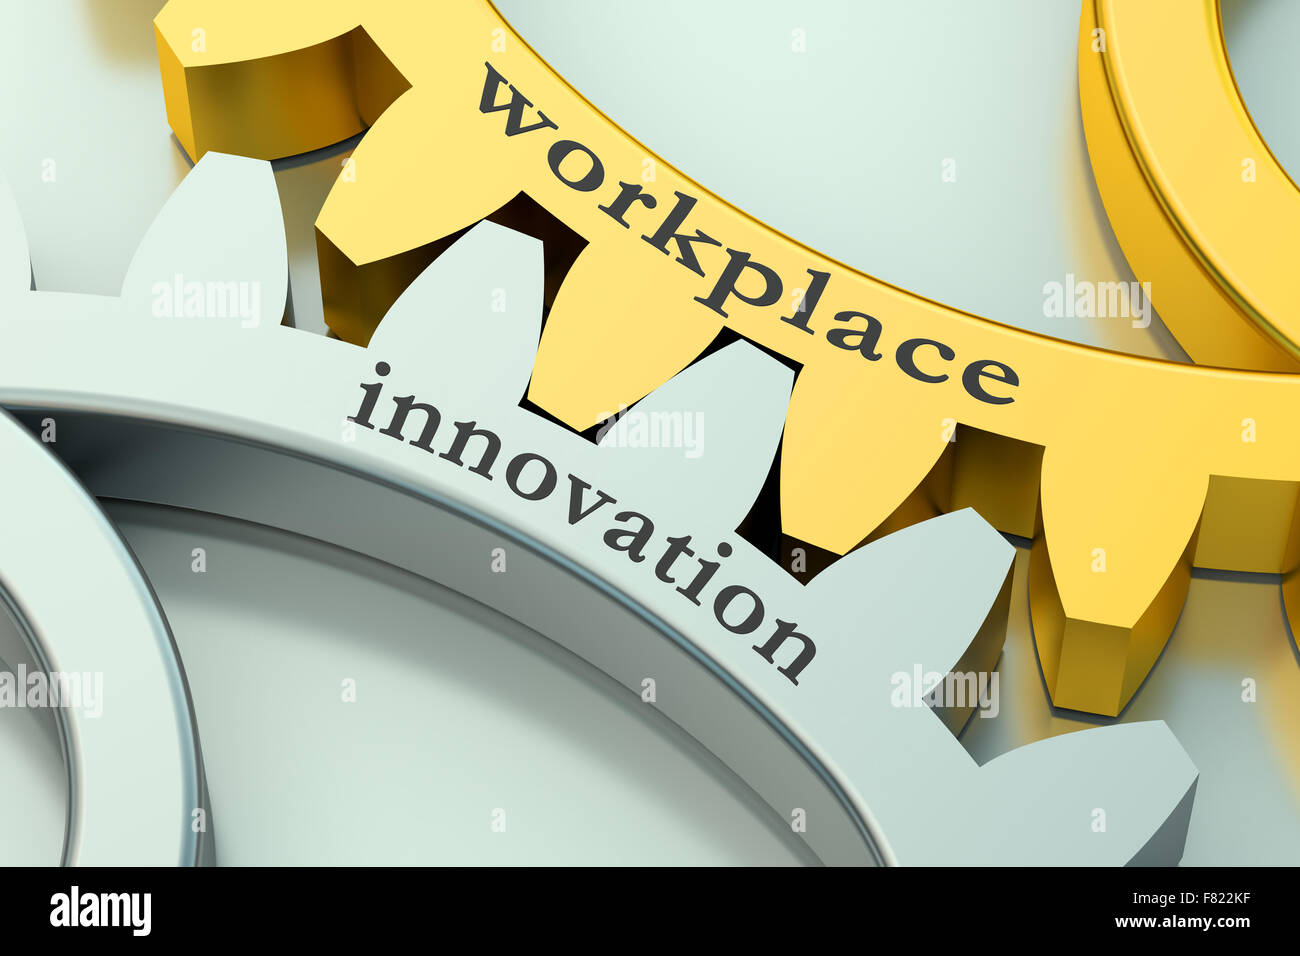 Workplace Innovation concept on the gearwheels Stock Photo